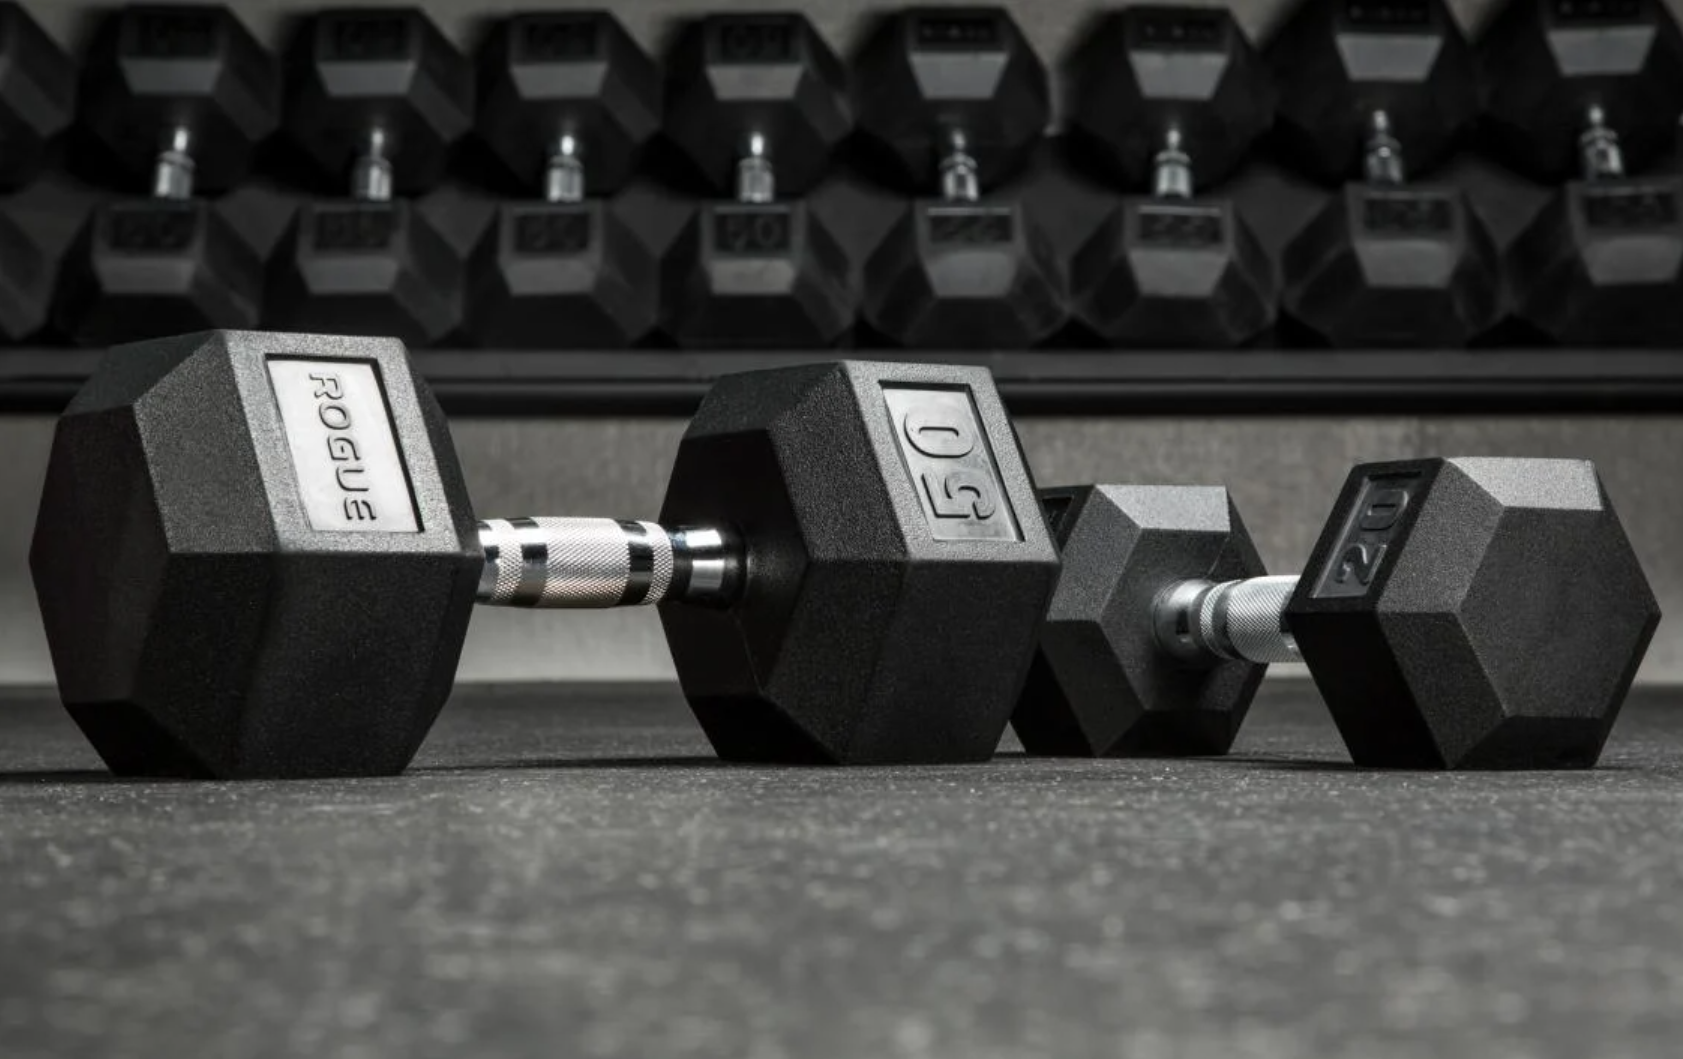 1: Best Overall Rubber Dumbbell - ROGUE RUBBER HEX DUMBBELLS